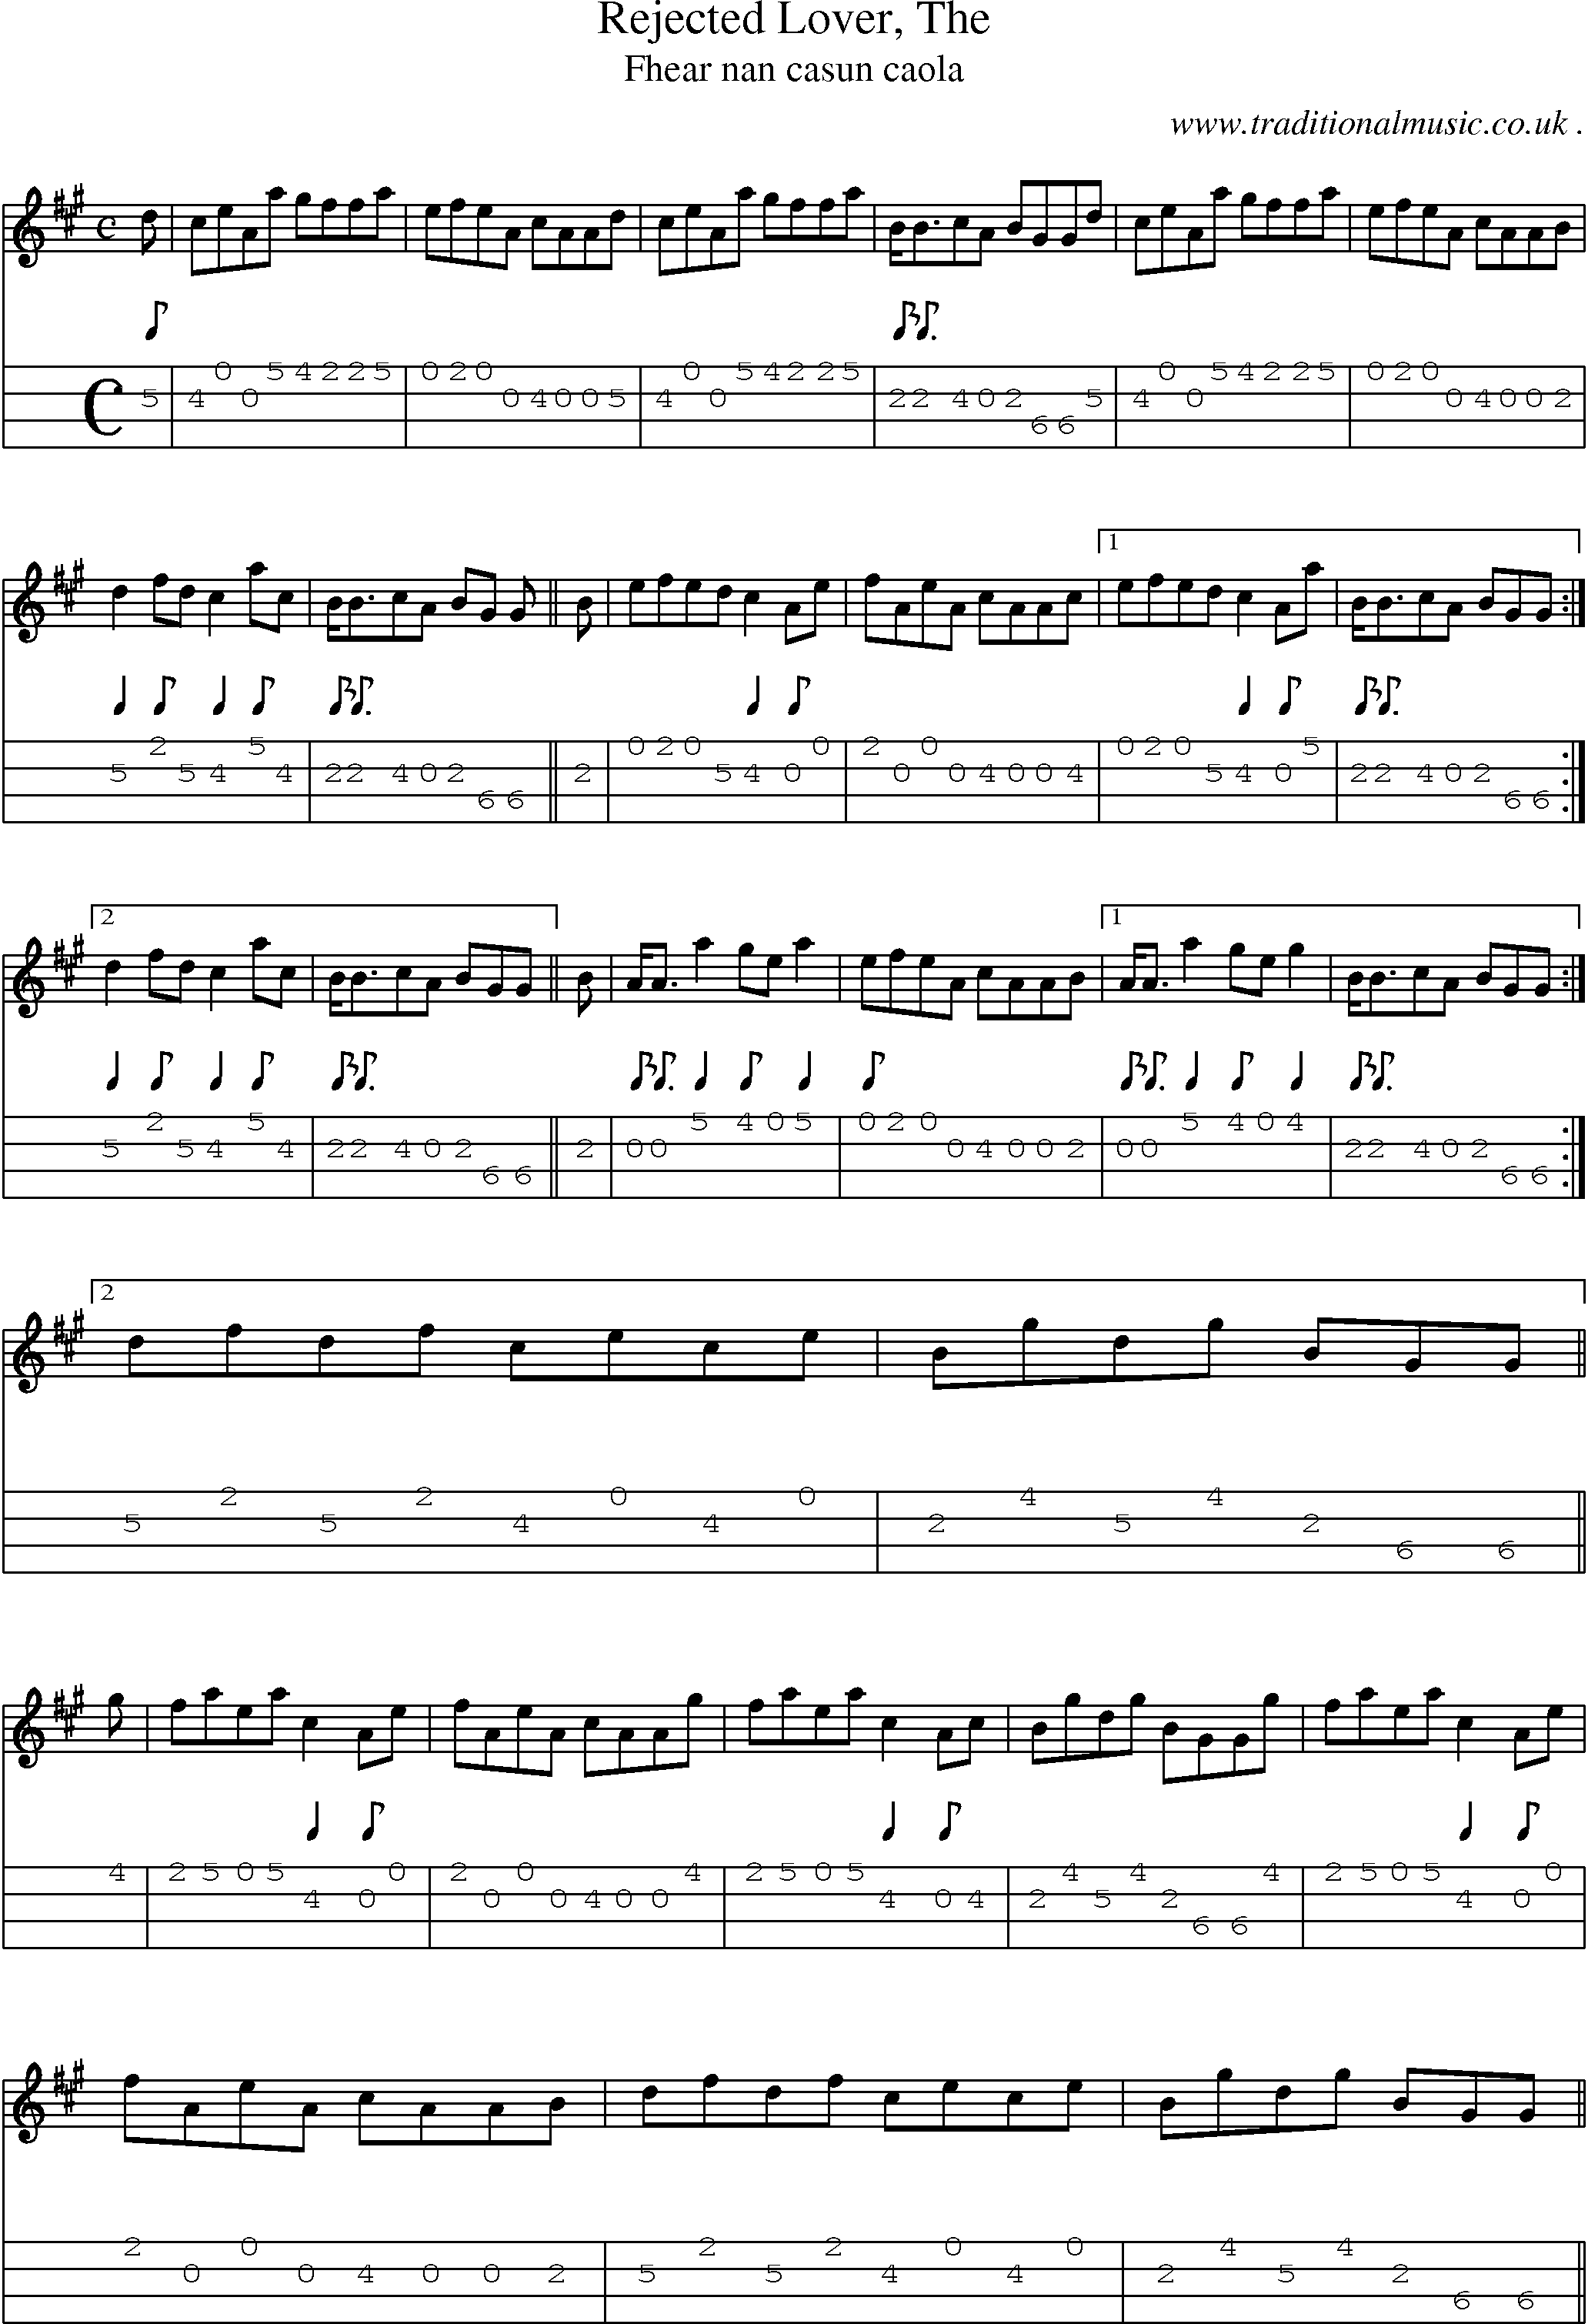 Sheet-music  score, Chords and Mandolin Tabs for Rejected Lover The